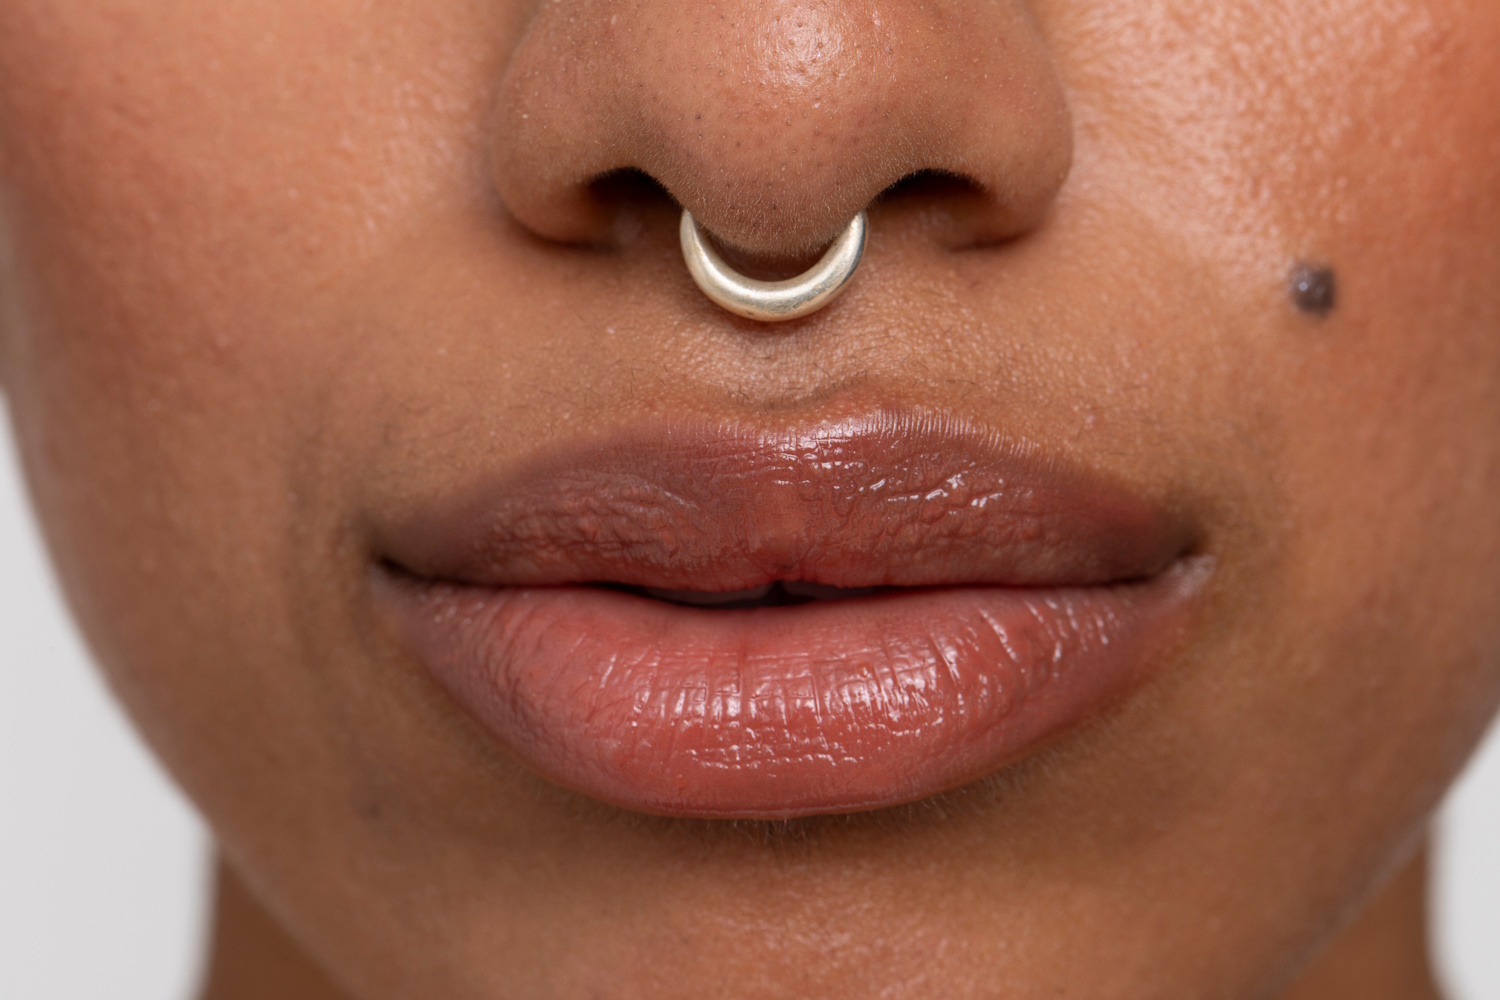 A close up of a woman with a septum ring.